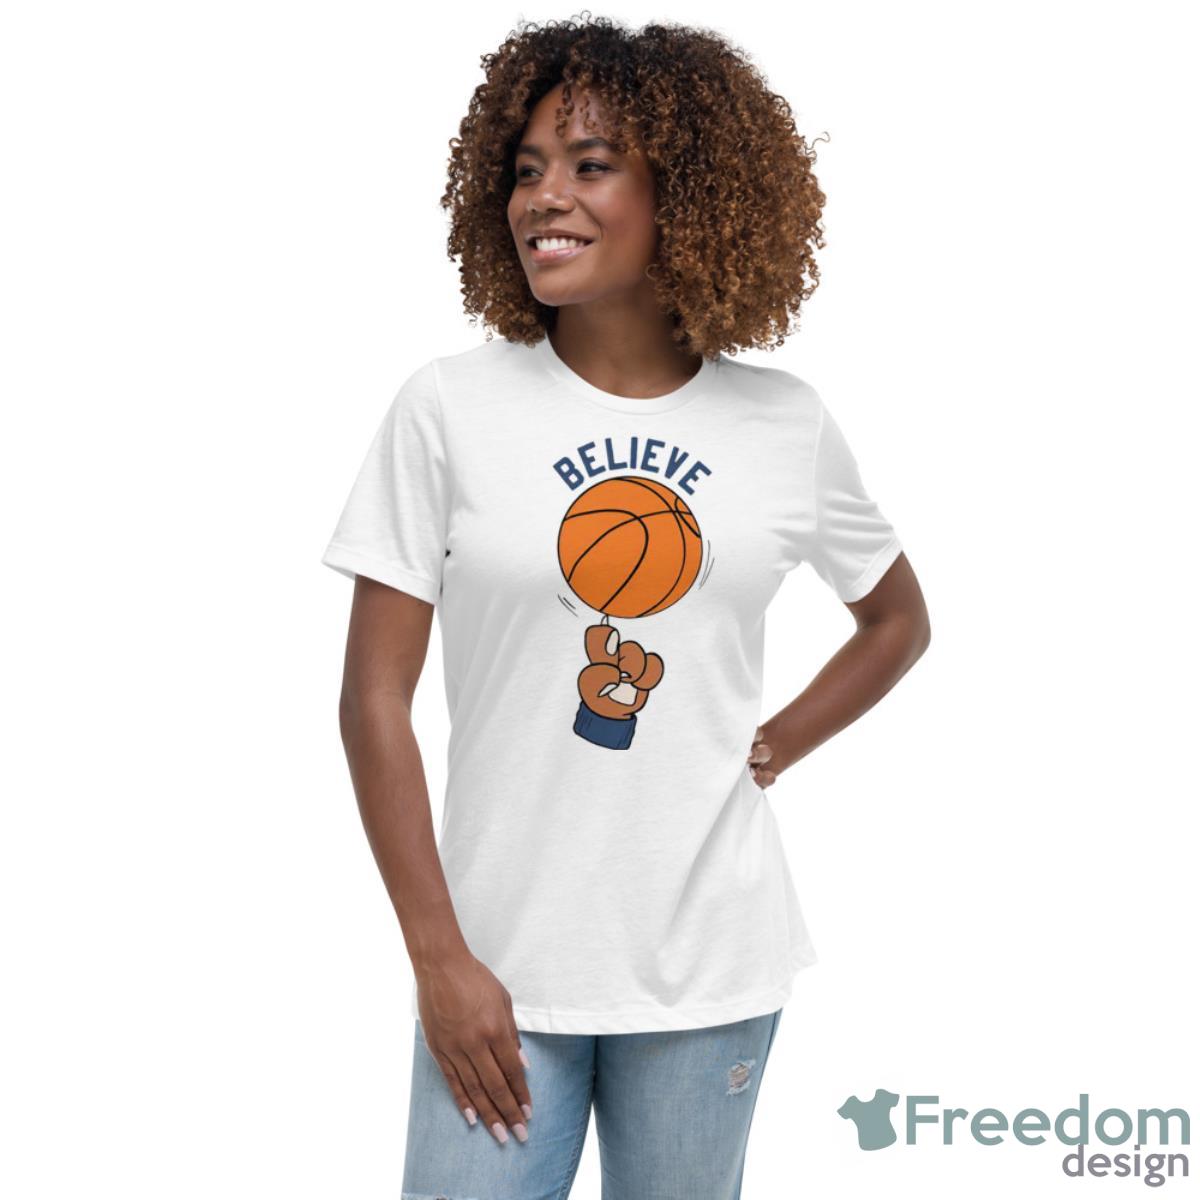 Penn State Nittany Lions Believe Shirt